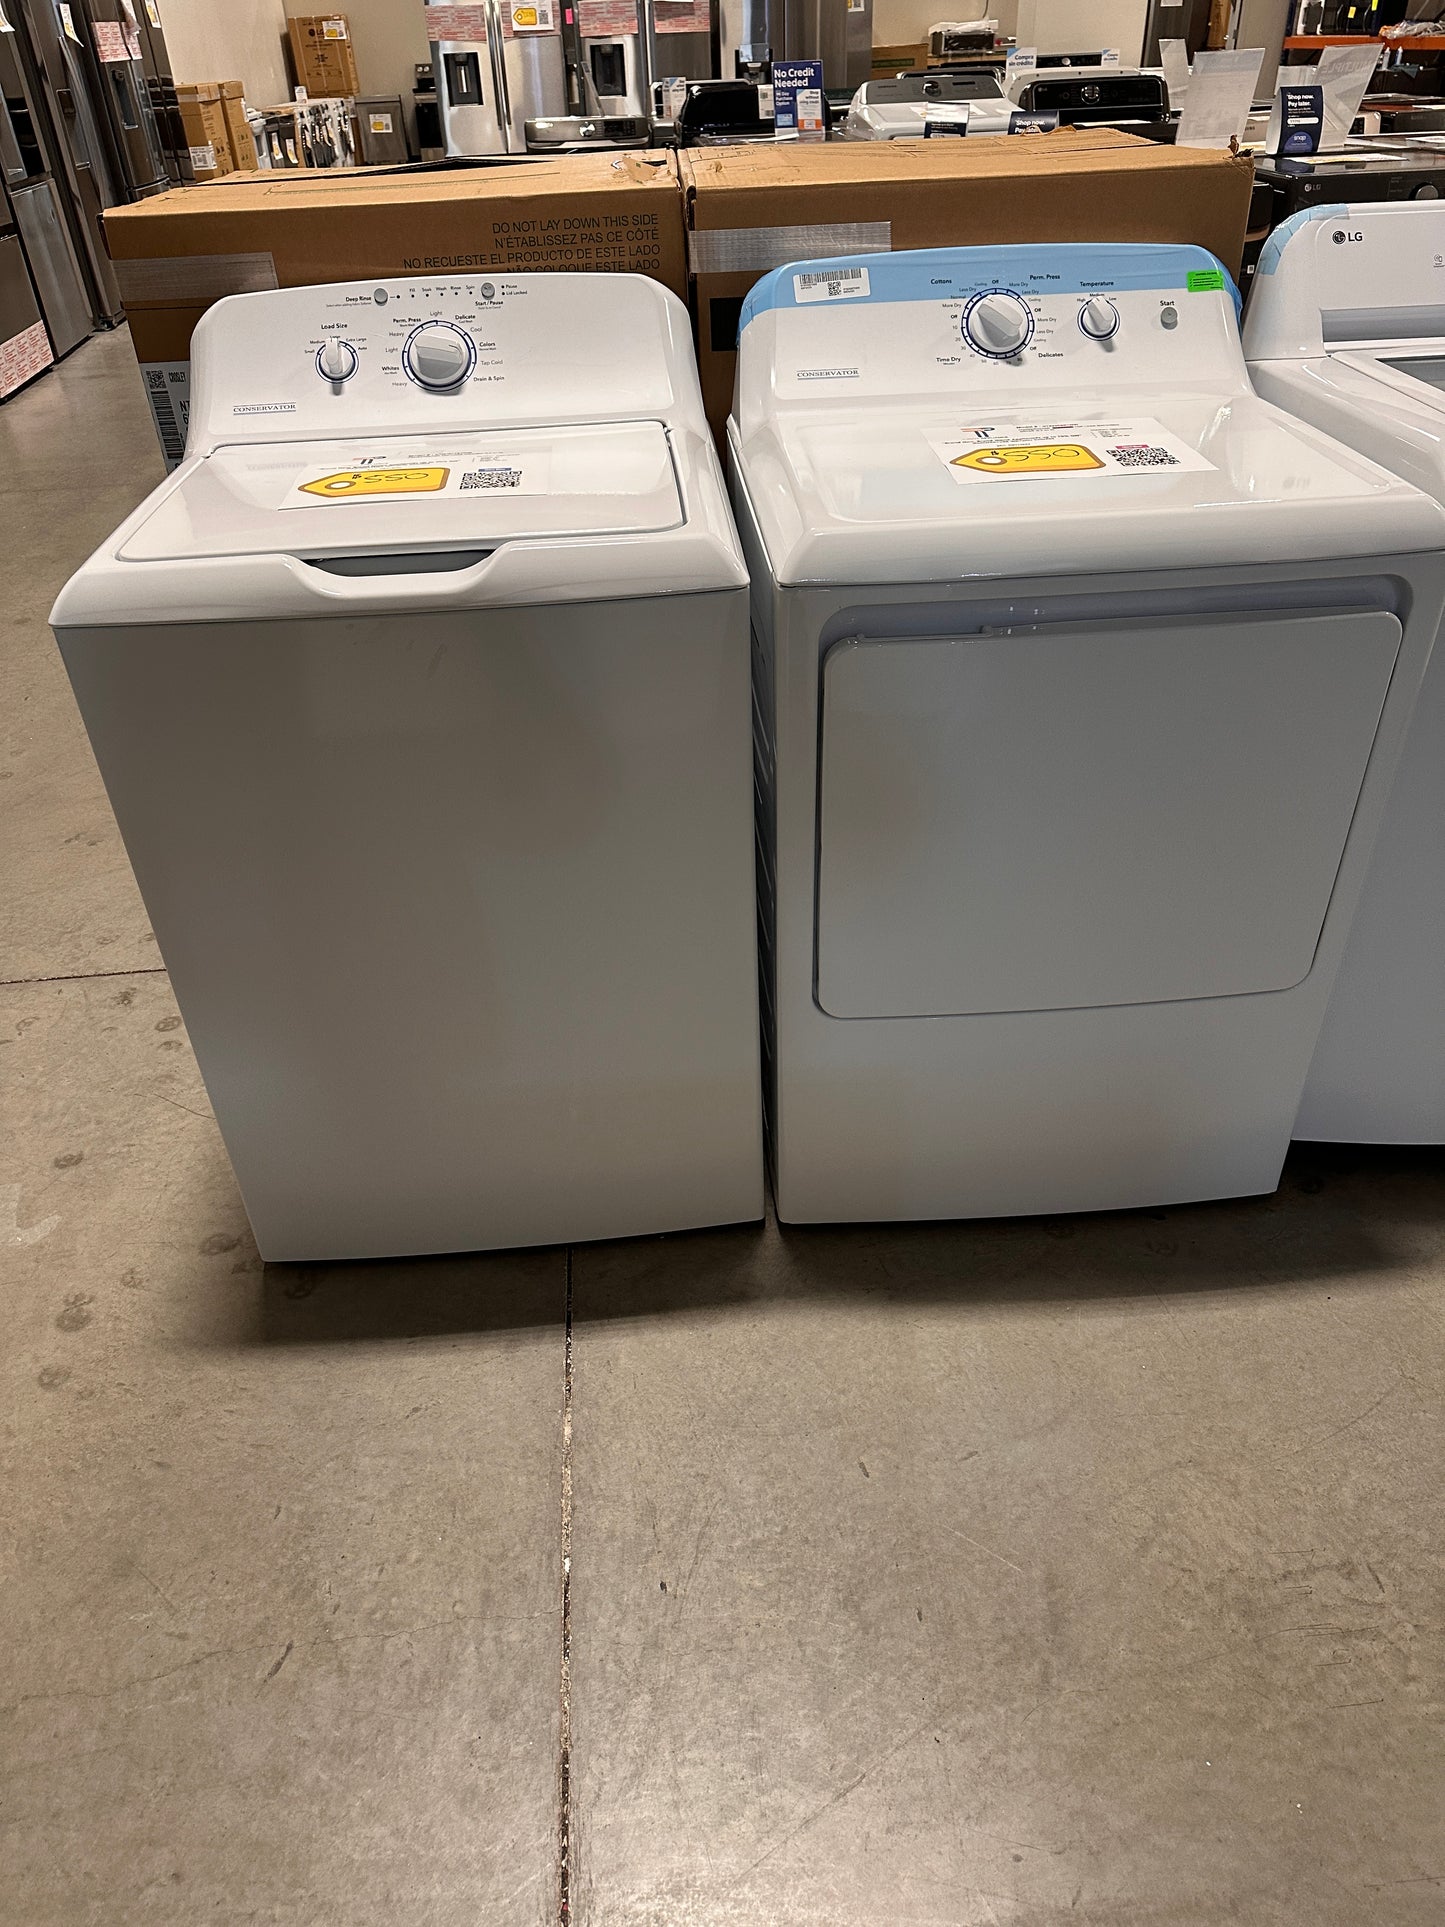 LAUNDRY SET - TOP LOAD WASHER WITH MATCHING DRYER - WAS13259 DRY12552